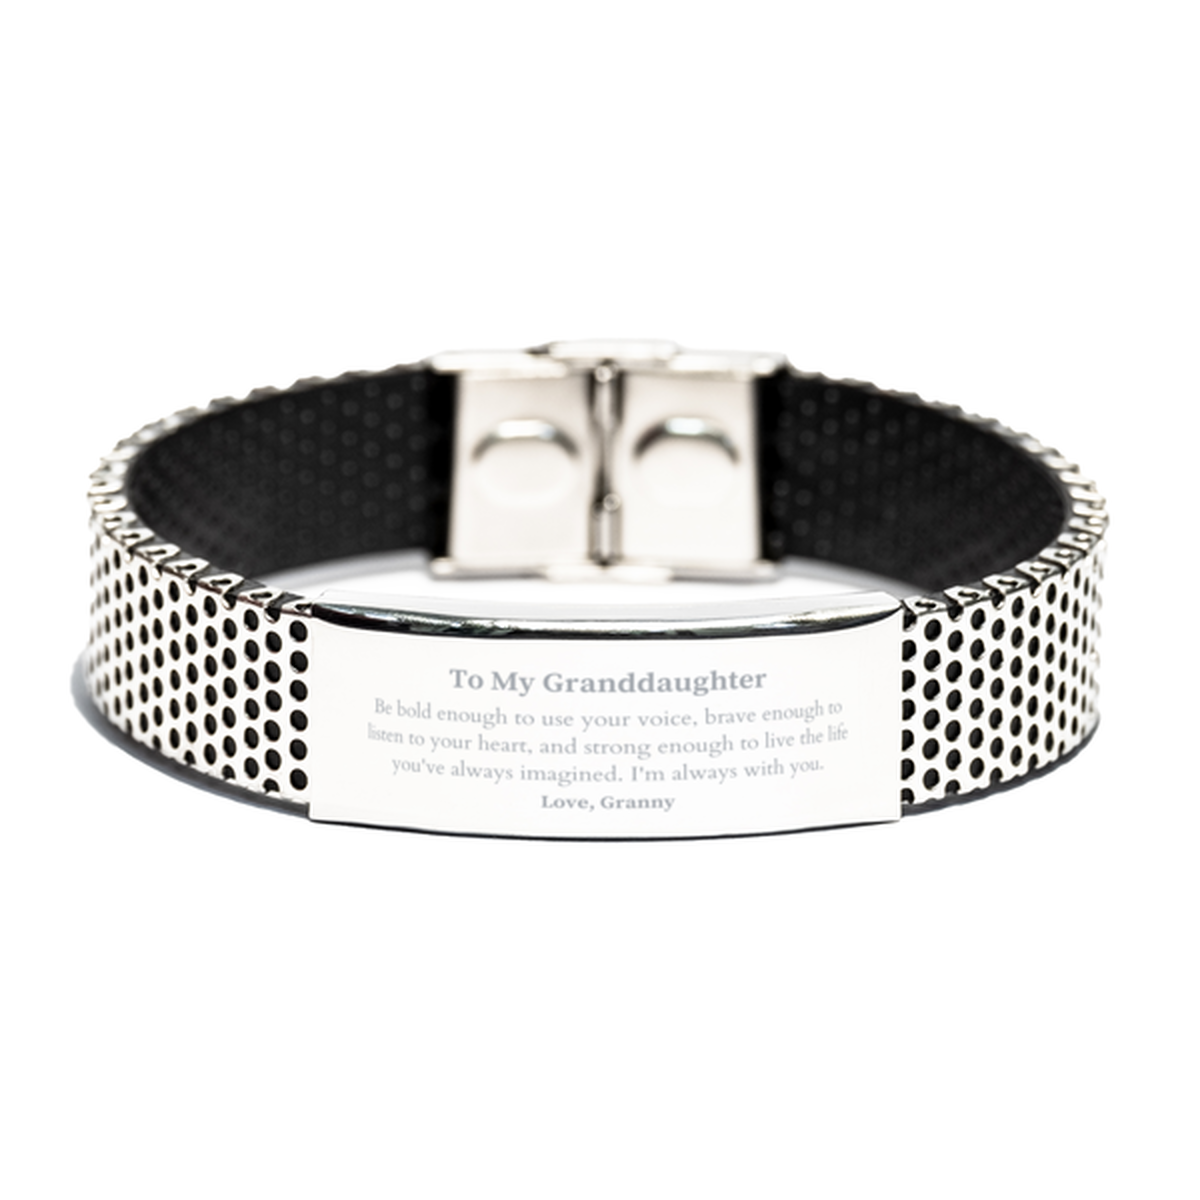 Keepsake Granddaughter Stainless Steel Bracelet Gift Idea Graduation Christmas Birthday Granddaughter from Granny, Granddaughter Be bold enough to use your voice, brave enough to listen to your heart. Love, Granny